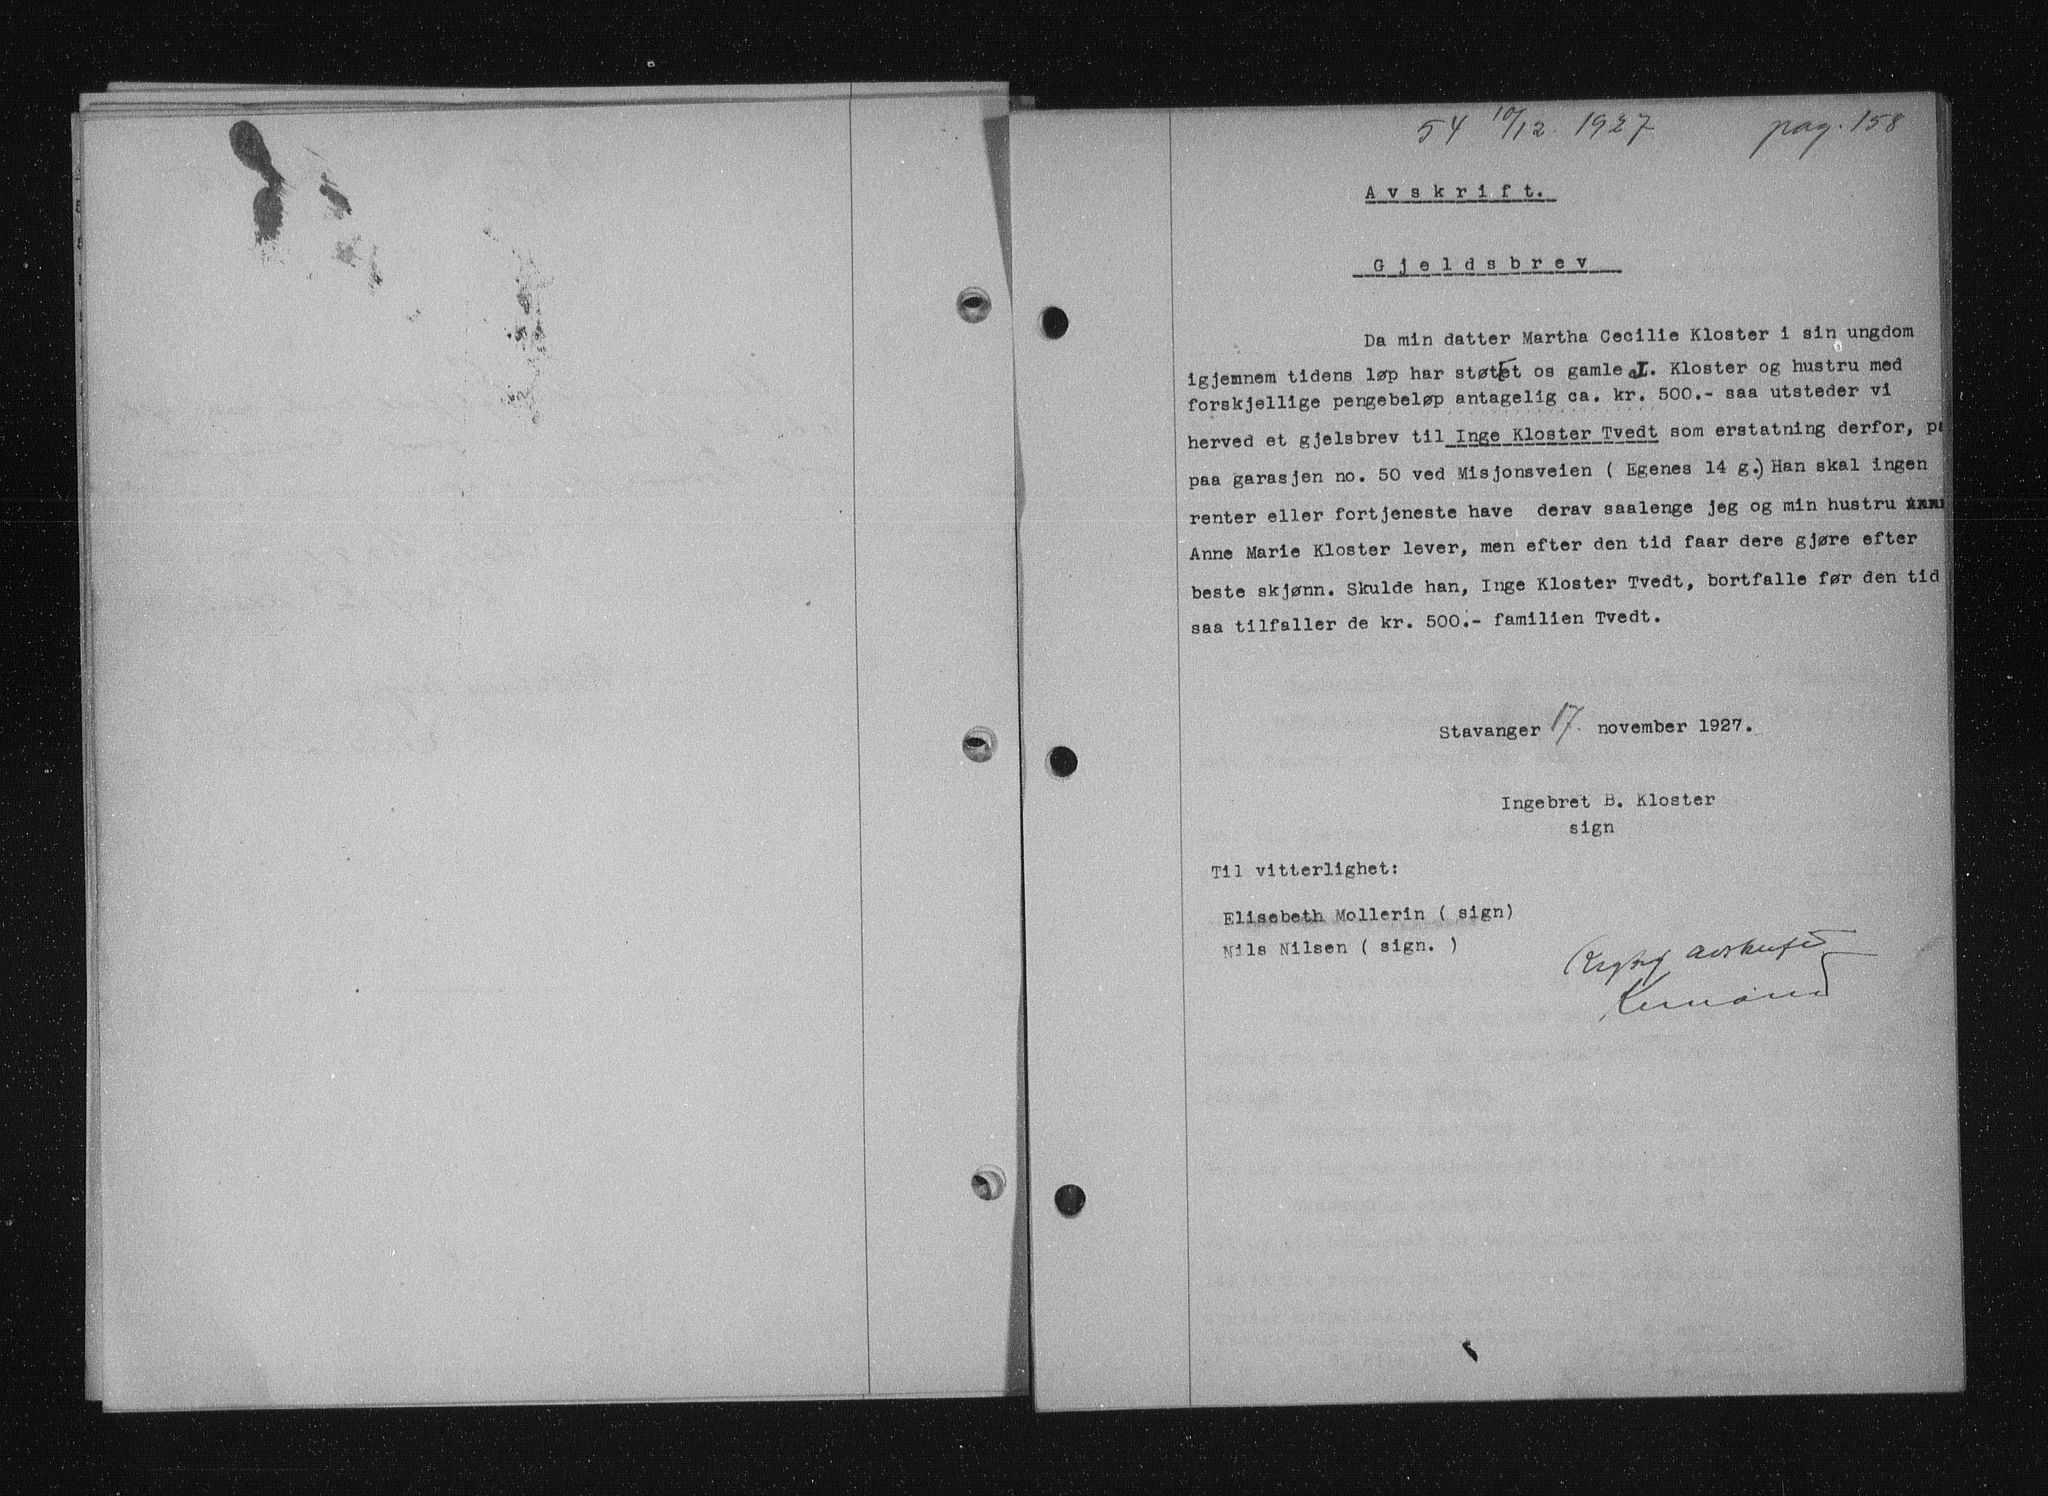 Stavanger byfogd, SAST/A-101408/001/4/41/410/410BB/L0053: Mortgage book no. 41, 1927-1928, Deed date: 10.12.1927